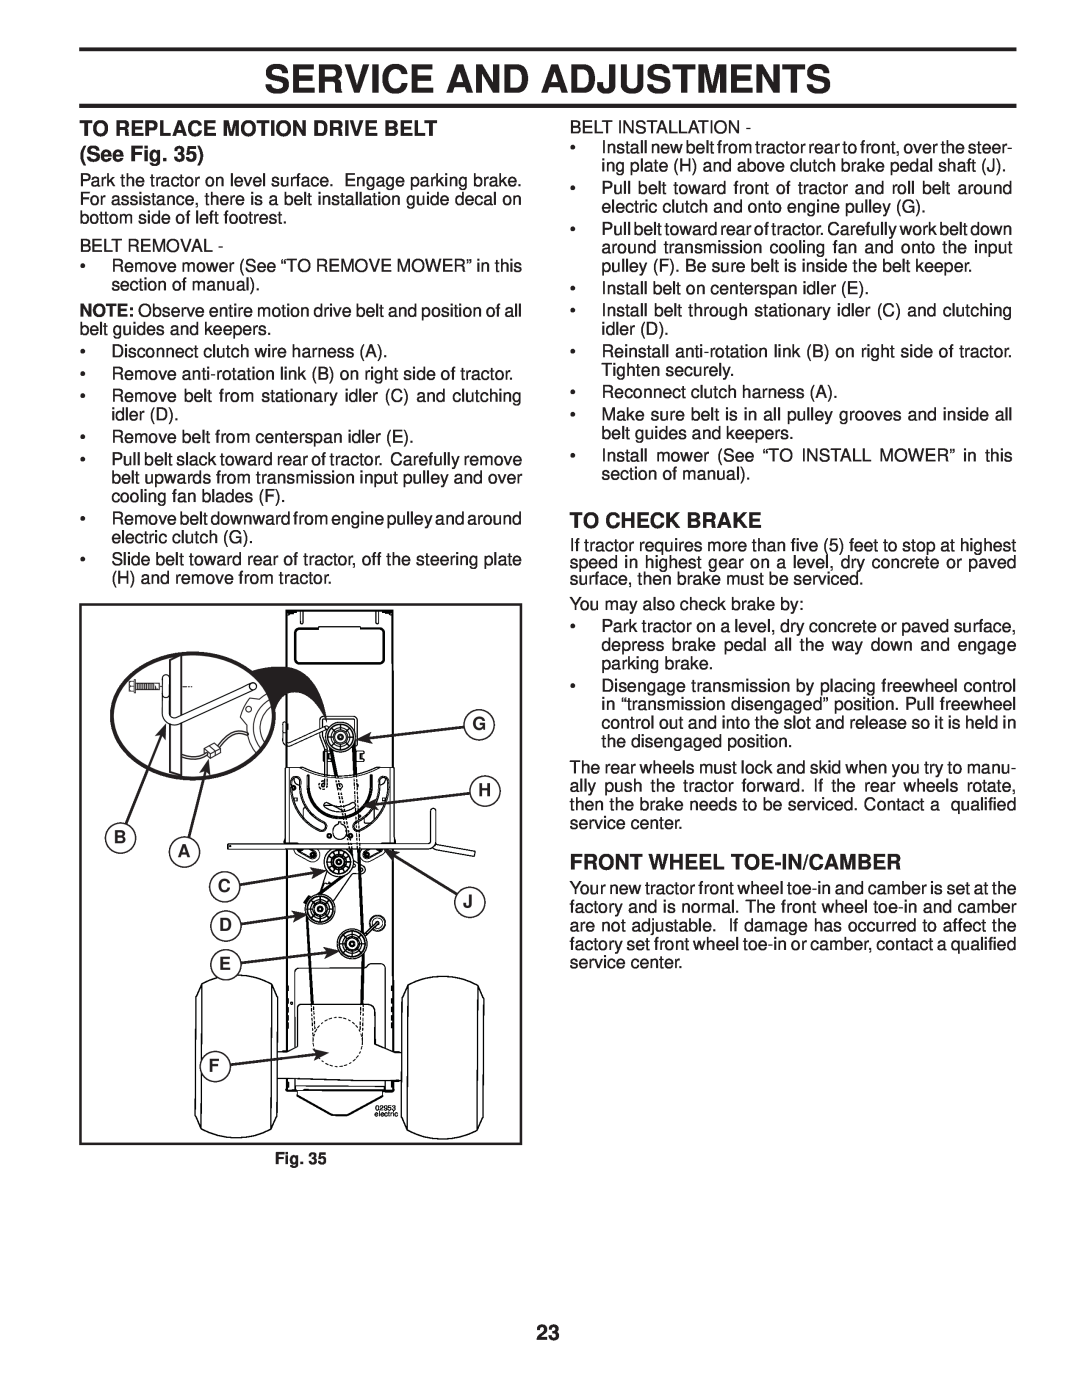 Husqvarna 96045001900 owner manual TO REPLACE MOTION DRIVE BELT See Fig, To Check Brake, Front Wheel Toe-In/Camber 